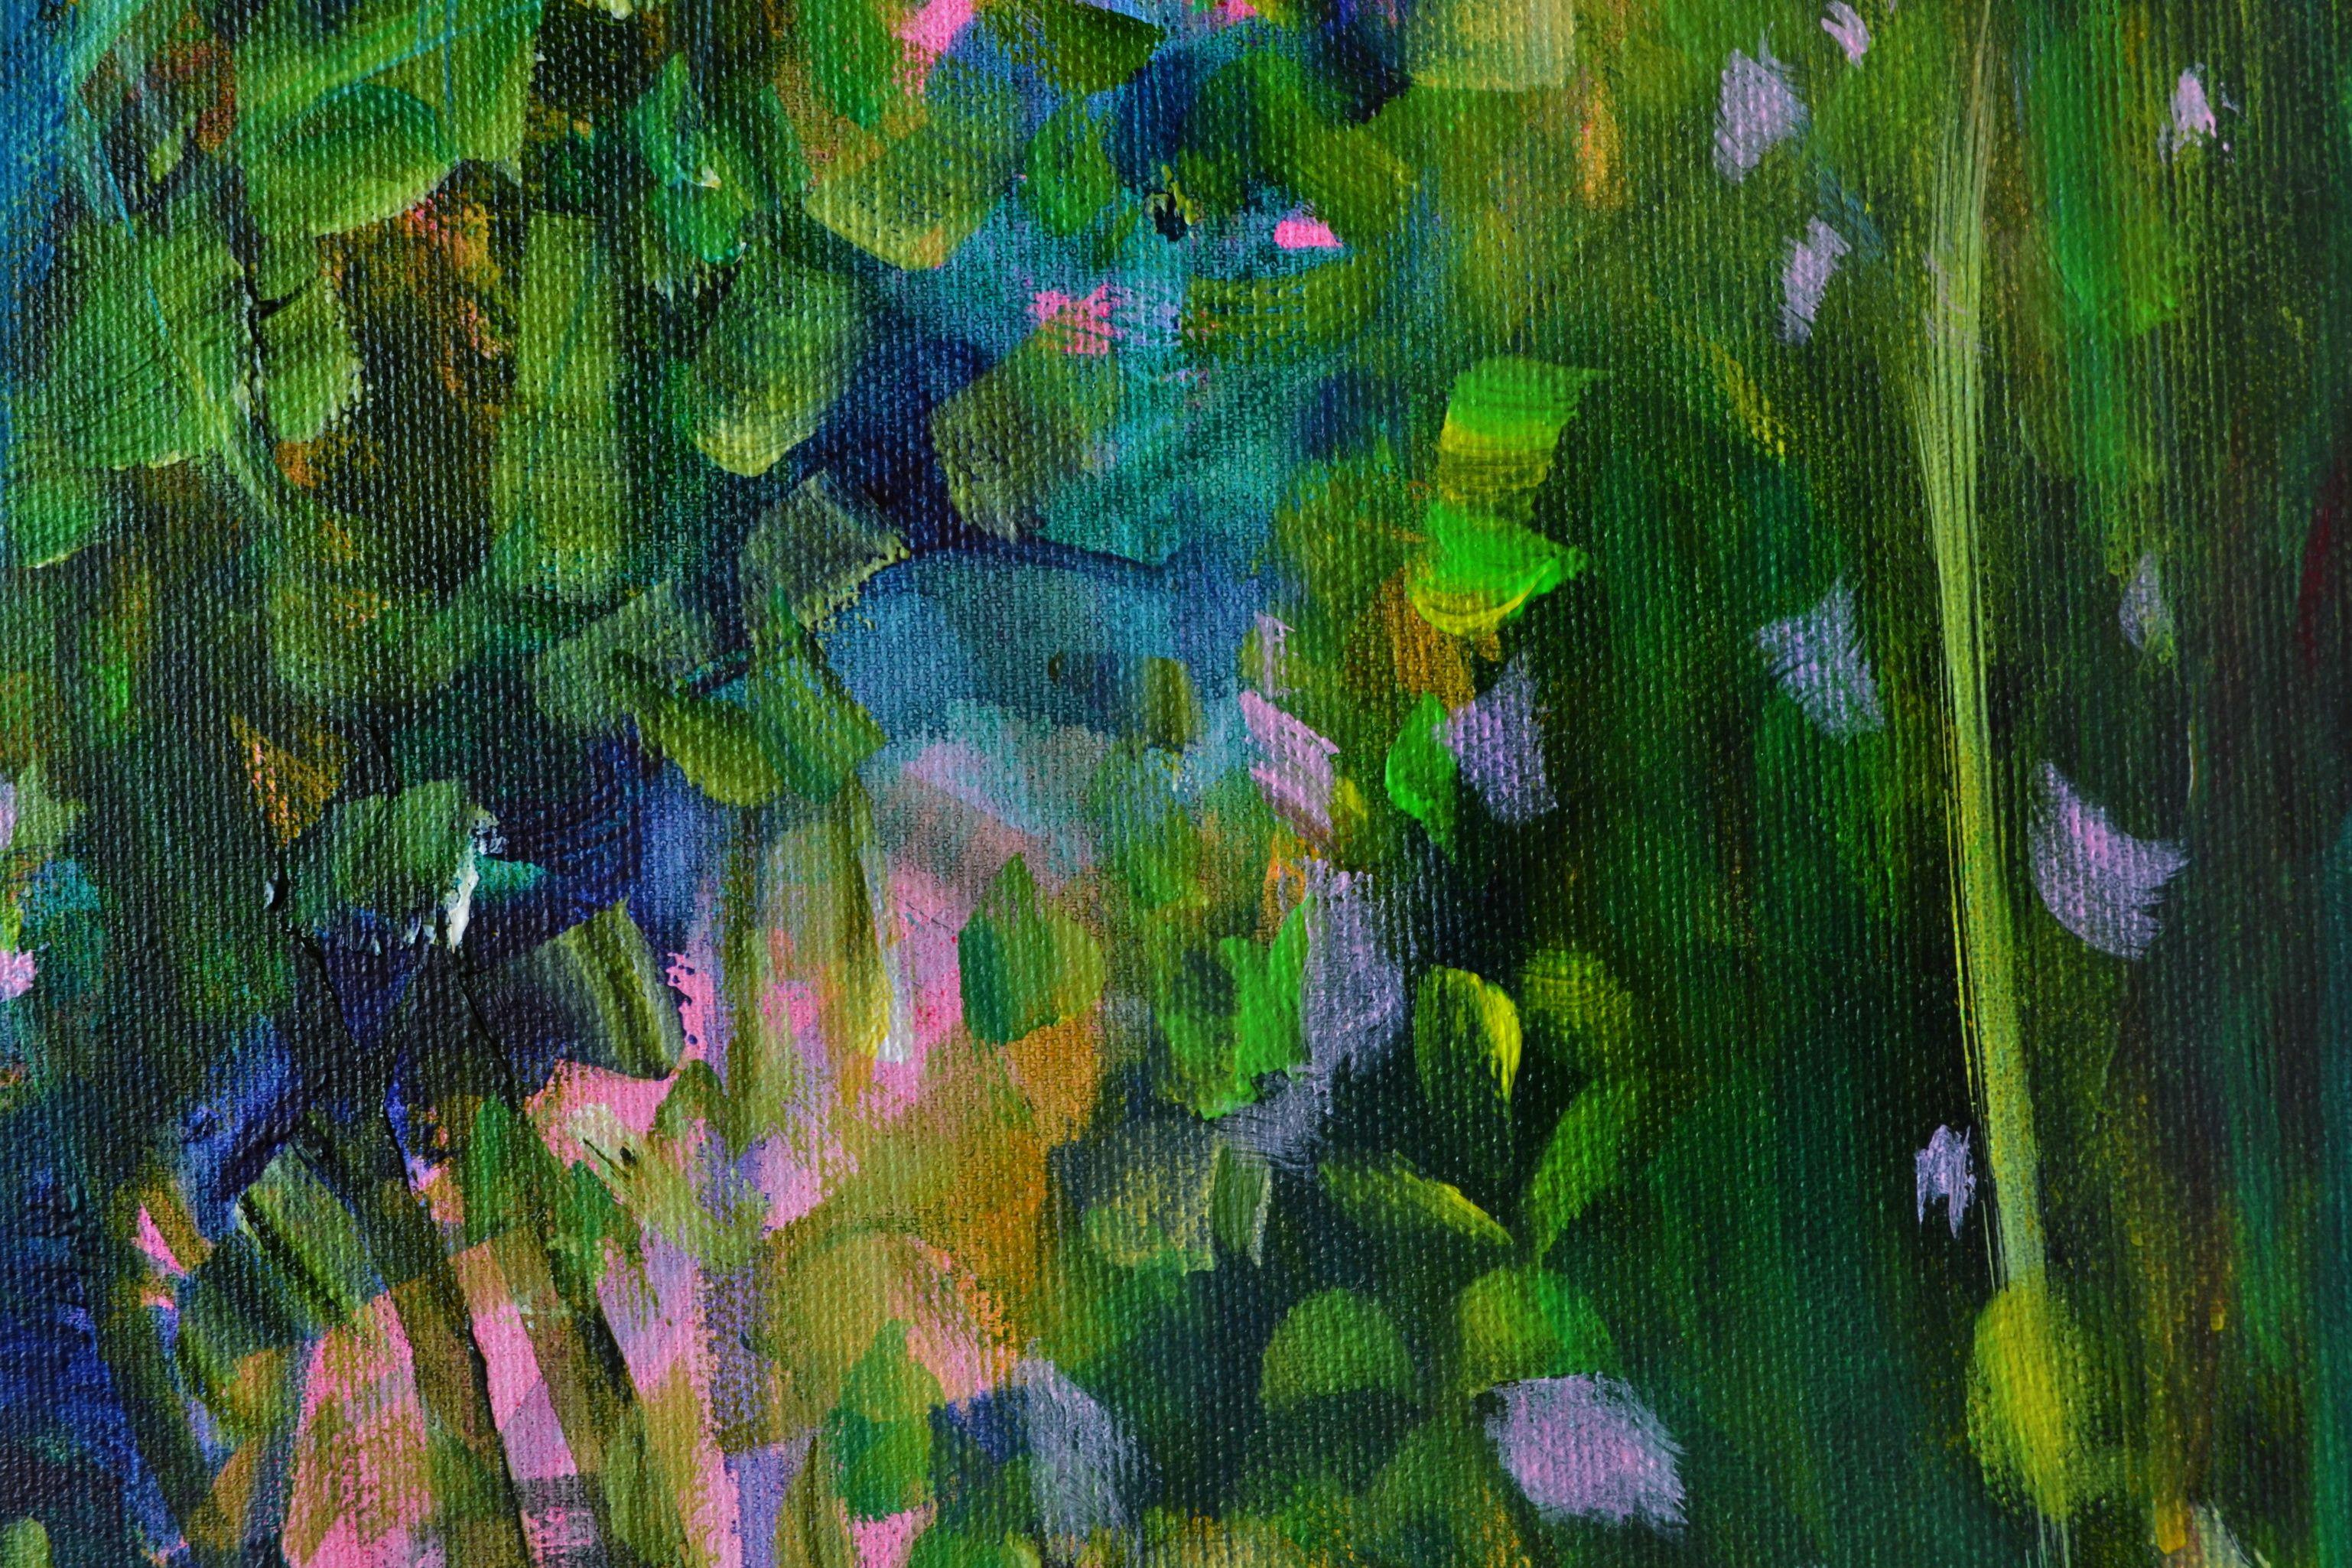 Axelmannstein II is the companion piece to Axelmannstein. I was inspired by a garden/park area in a small town in Bavaria - it actually belongs to a luxury hotel.  The garden has some ponds, old trees, small path - a true idyll.    The painting is